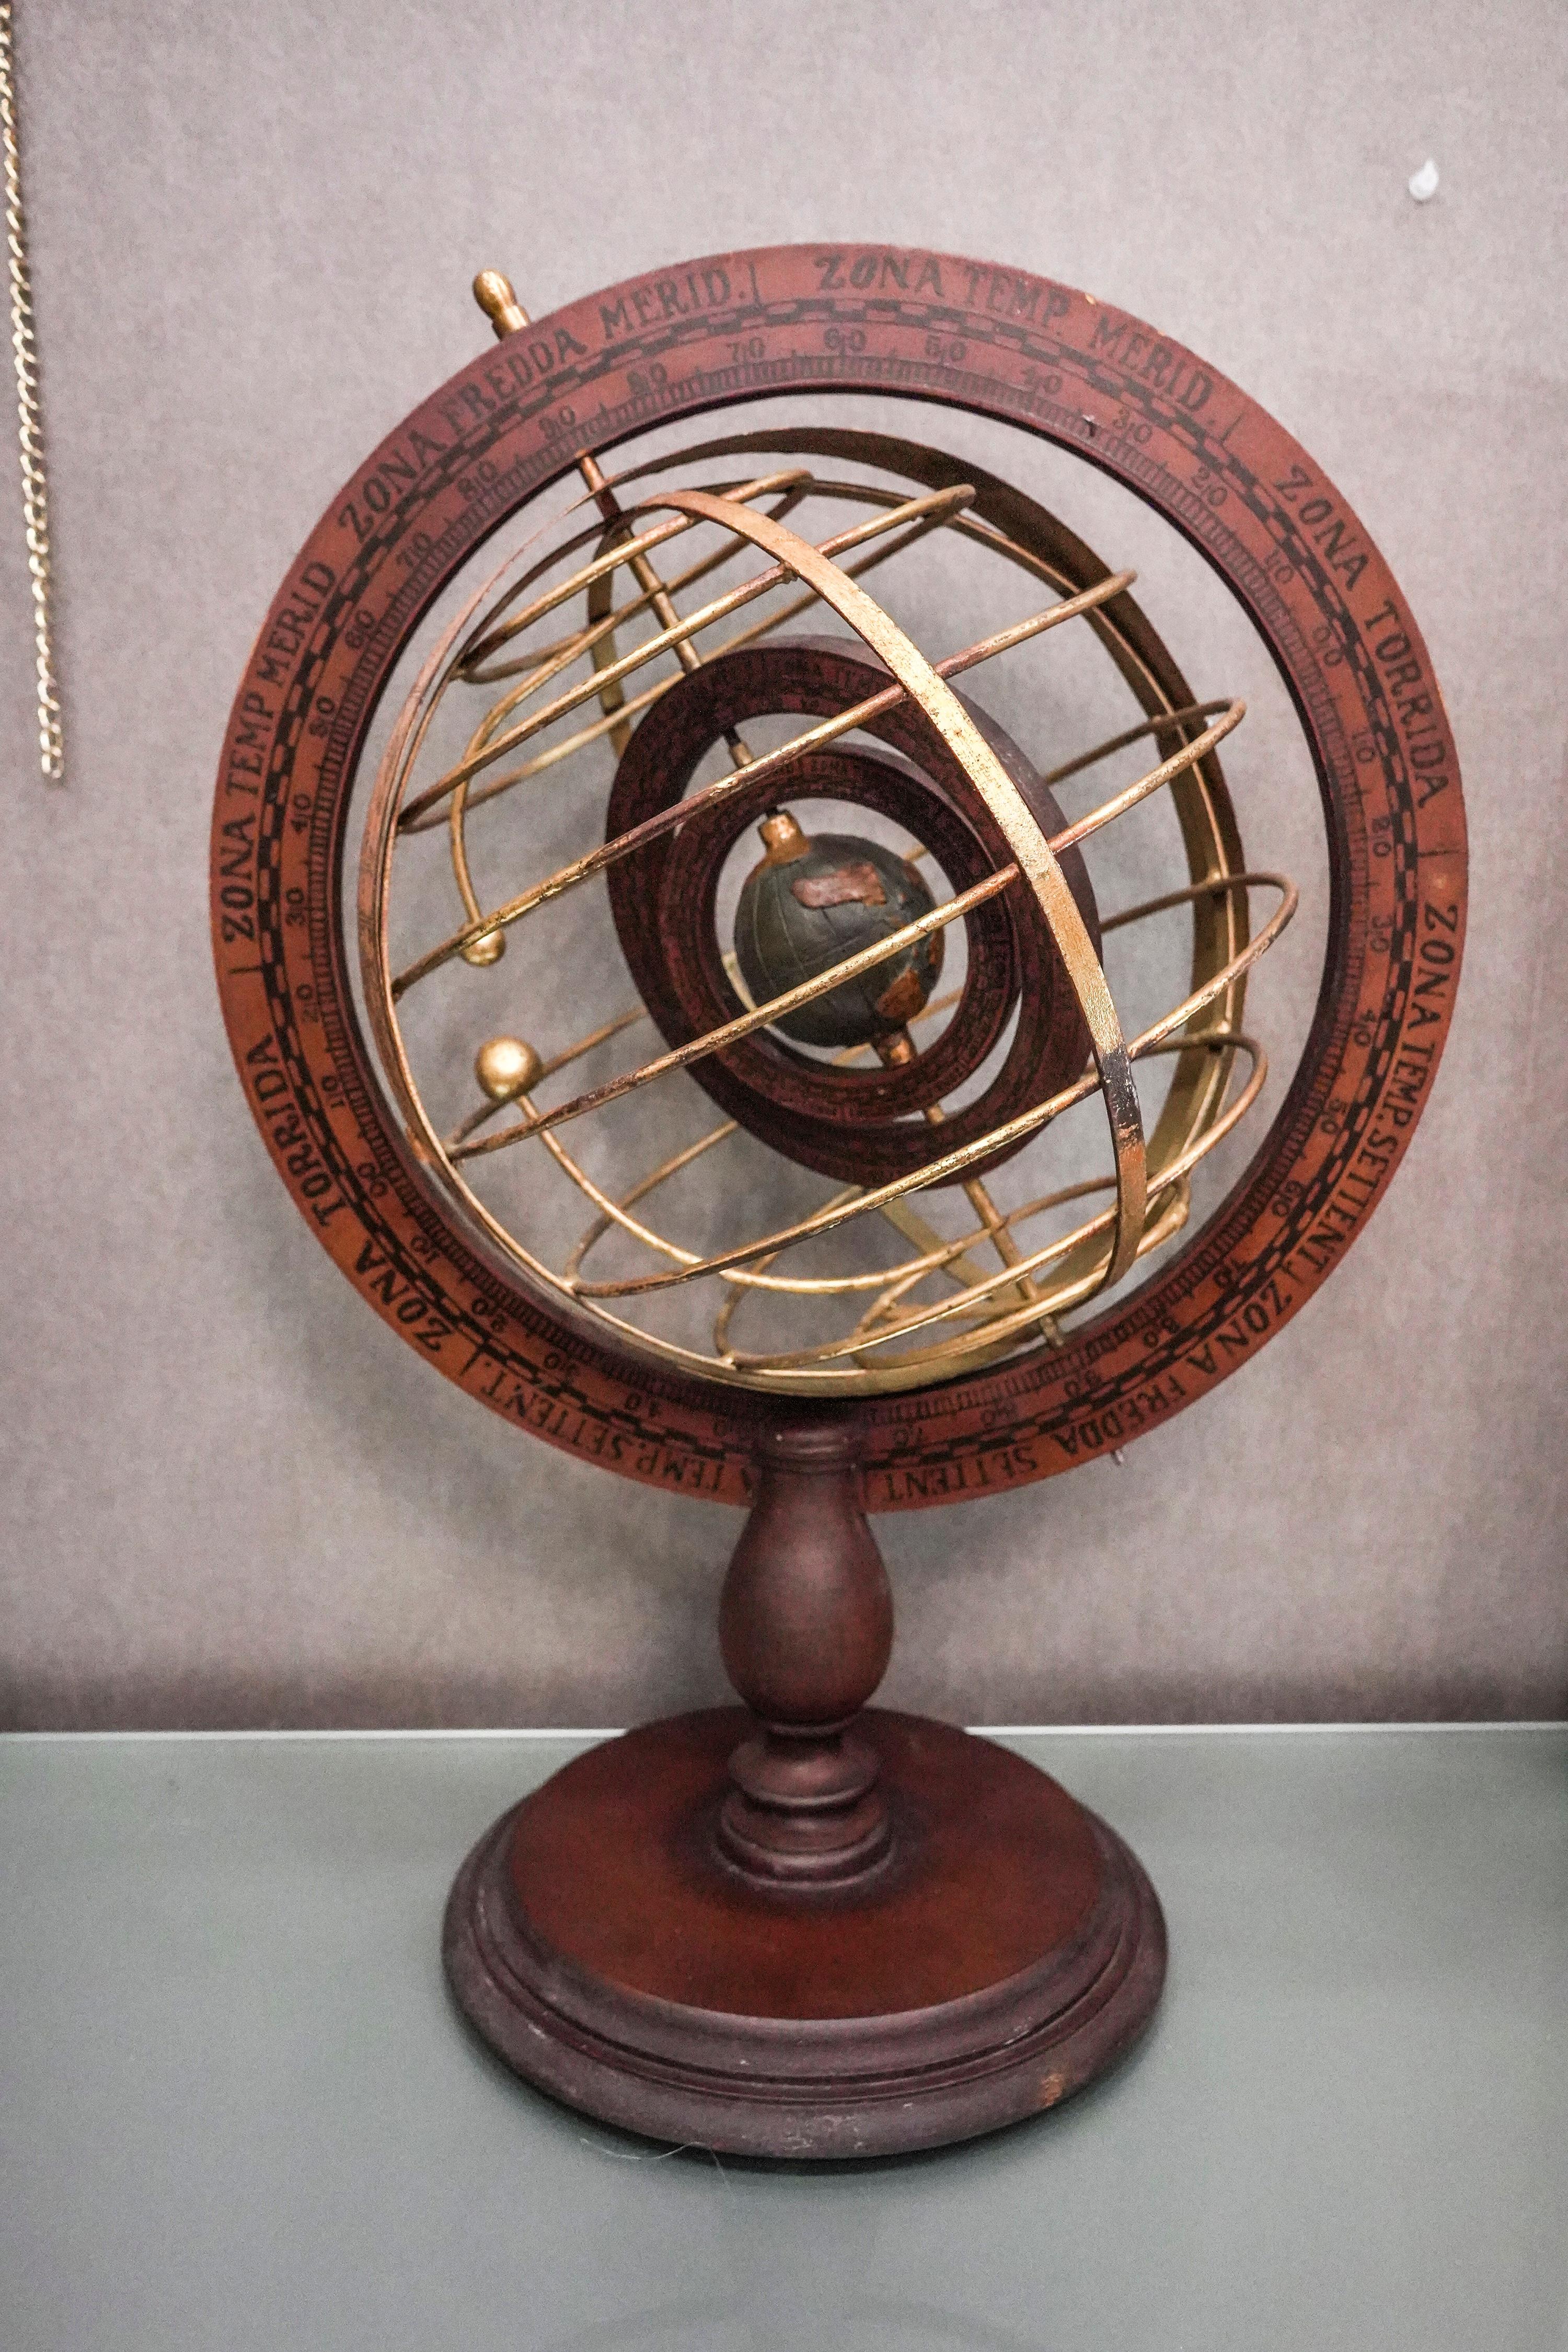 Stunning and large beginning of 20th century Portuguese wood and brass armillary sphere with double rotating globe and meridian globe with xylographed zodiac symbols.
Base in wood and golden brass spheres.
It has been purchased in an English